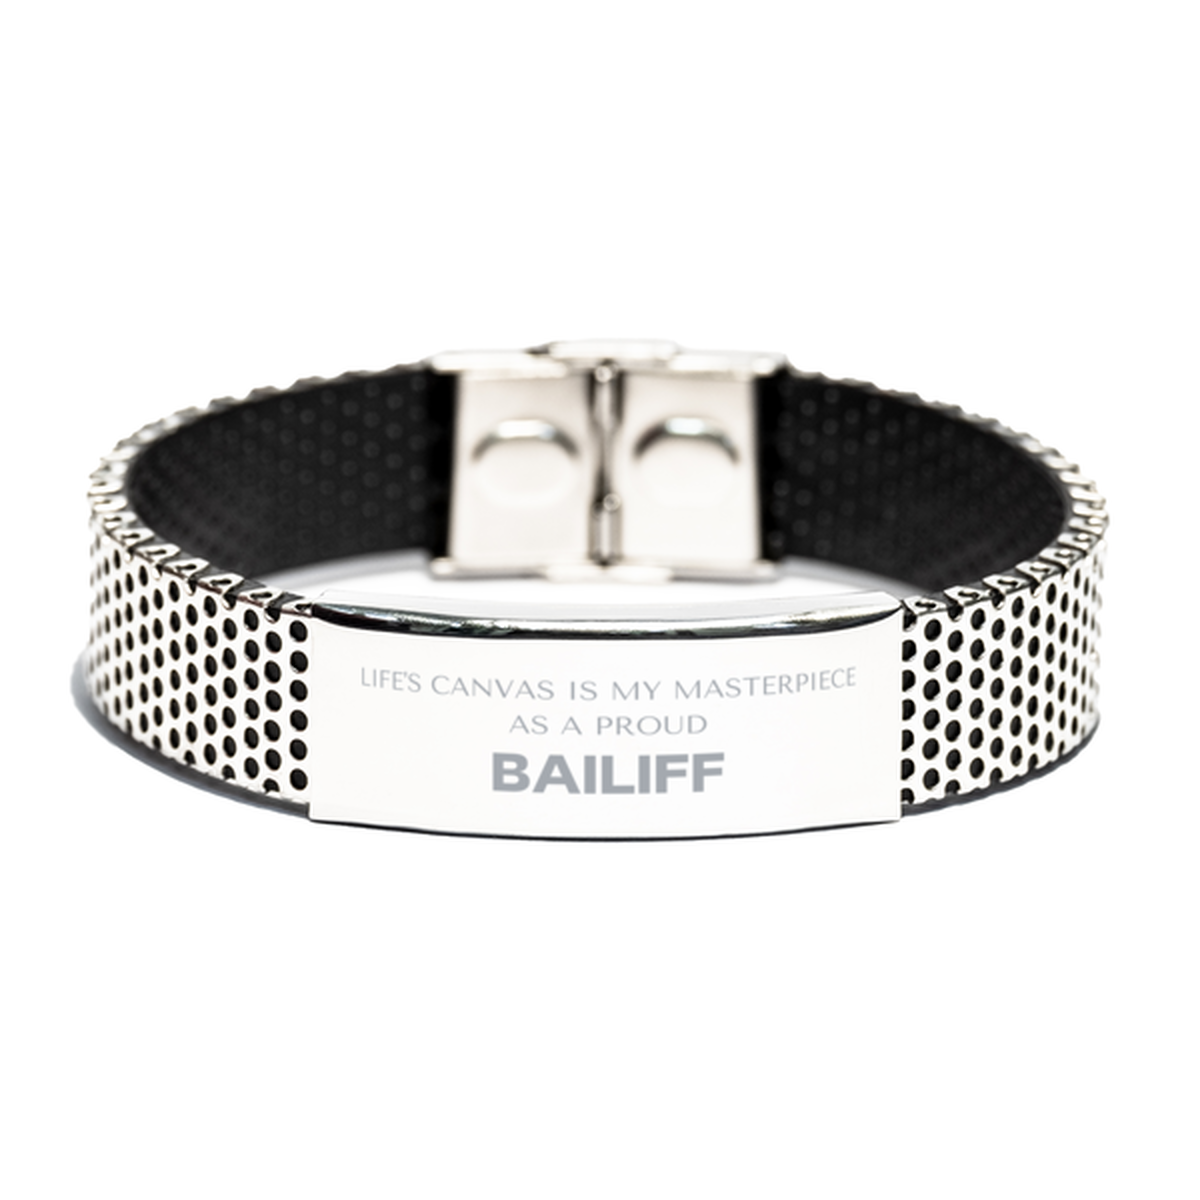 Proud Bailiff Gifts, Life's canvas is my masterpiece, Epic Birthday Christmas Unique Stainless Steel Bracelet For Bailiff, Coworkers, Men, Women, Friends